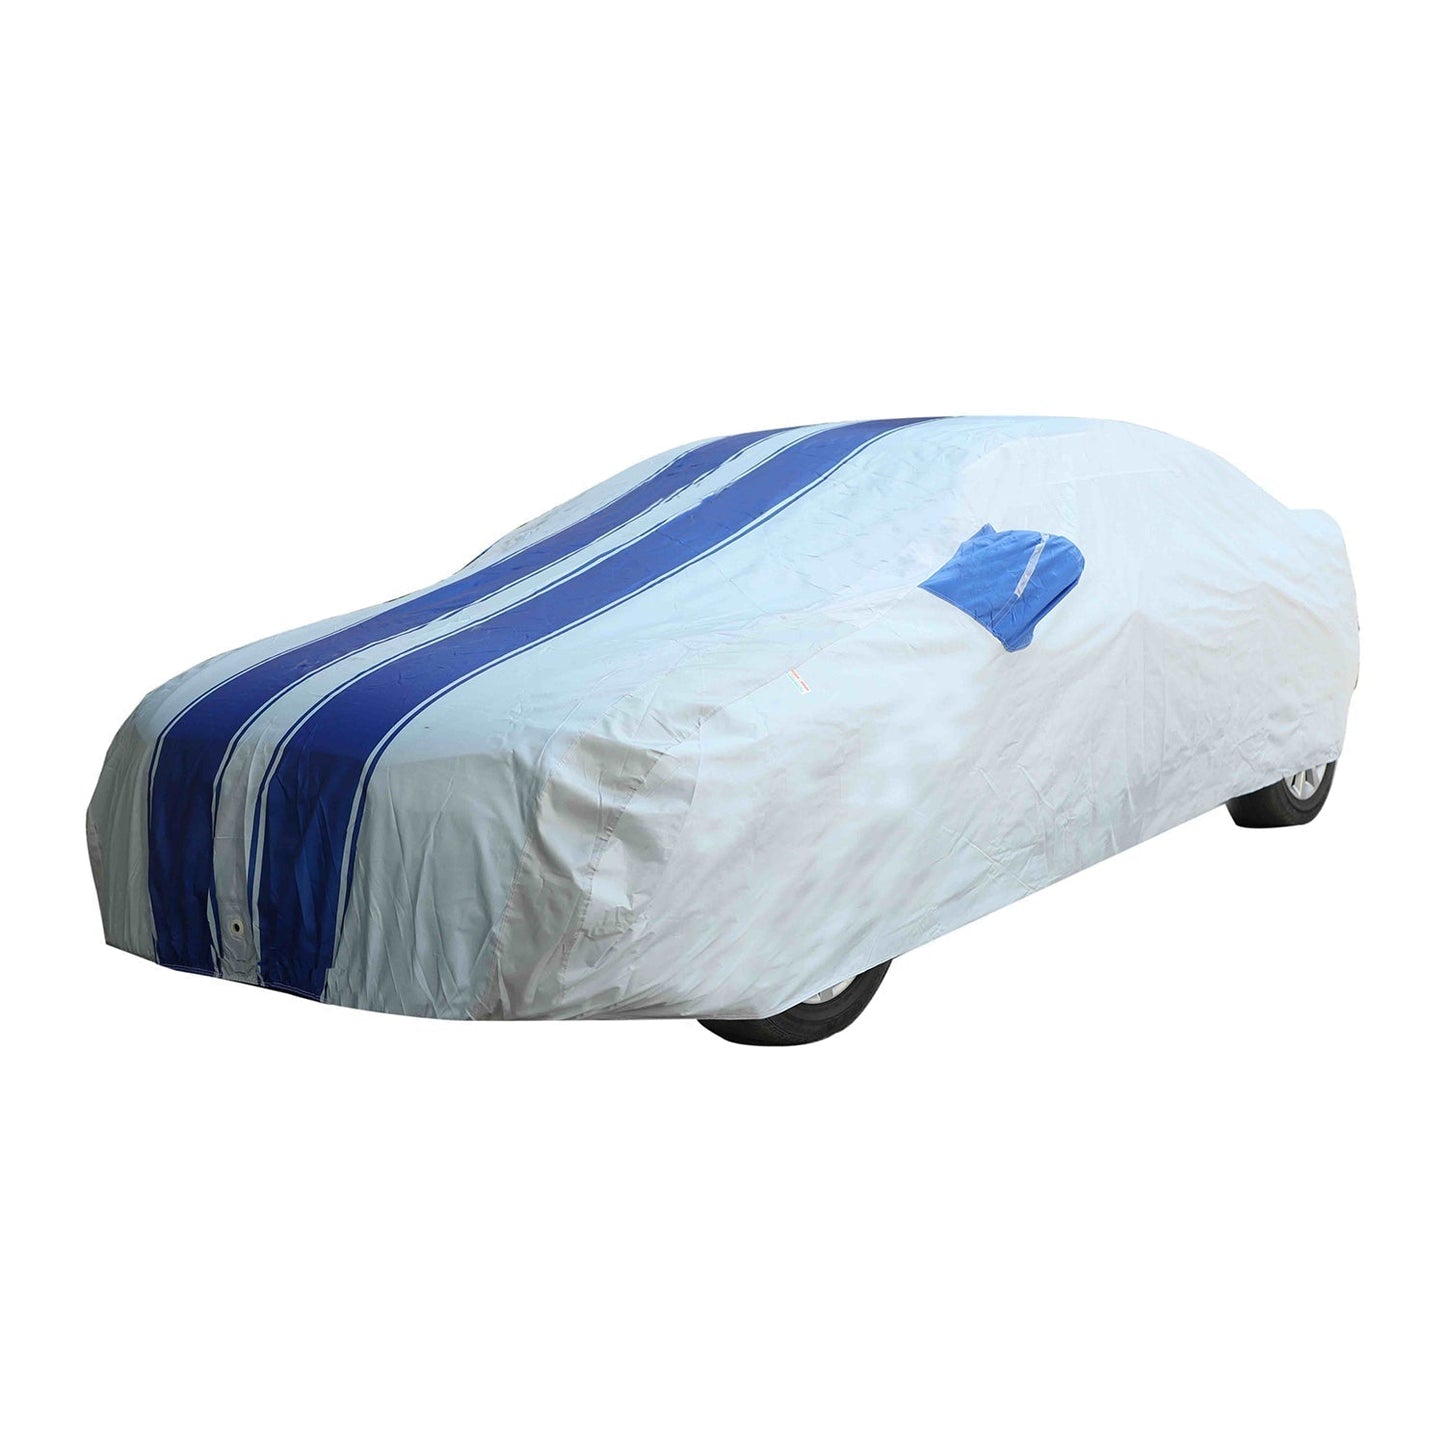 Oshotto 100% Blue dustproof and Water Resistant Car Body Cover with Mirror Pockets For Jaguar XF/XS